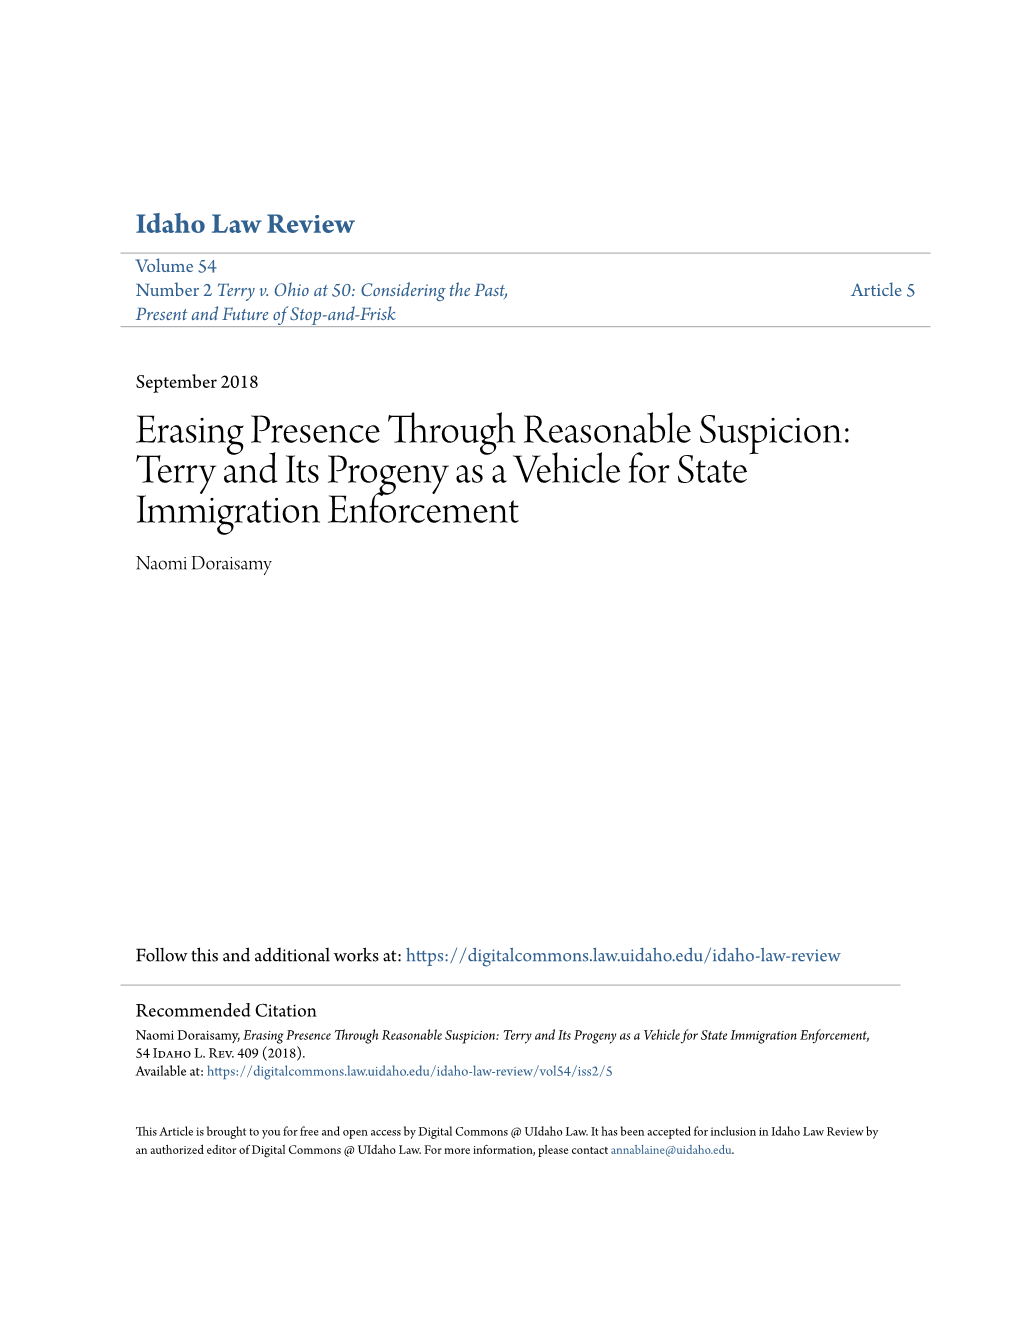 Erasing Presence Through Reasonable Suspicion: Terry and Its Progeny As a Vehicle for State Immigration Enforcement Naomi Doraisamy